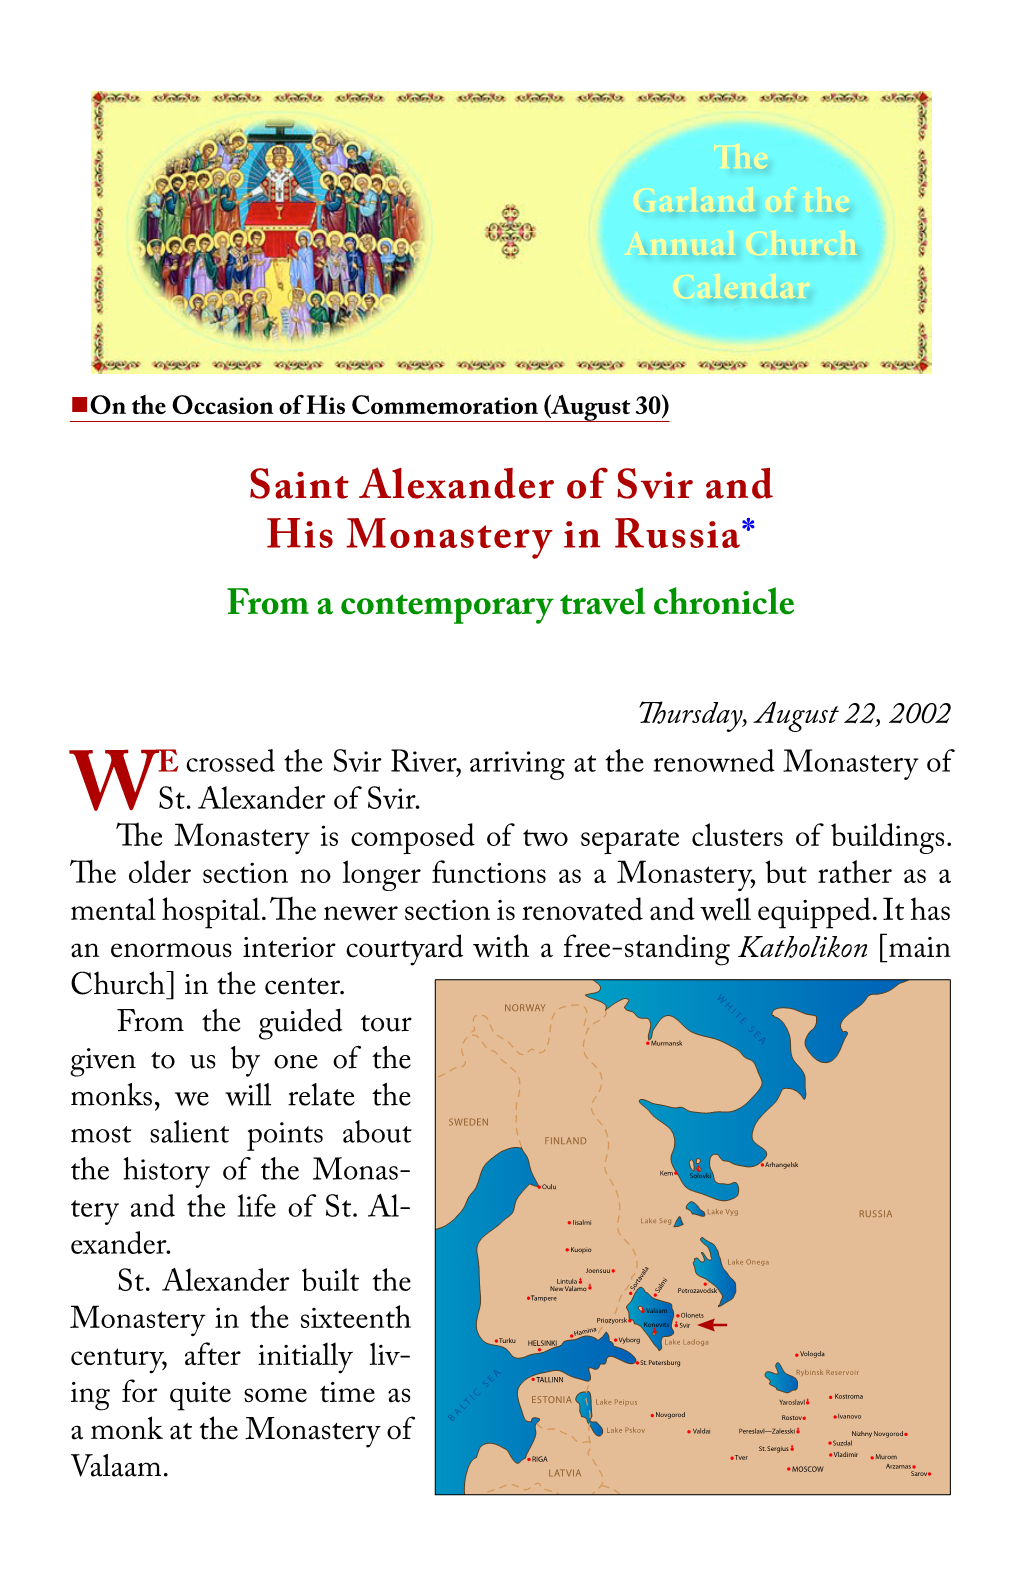 Saint Alexander of Svir and His Monastery in Russia* from a Contemporary Travel Chronicle